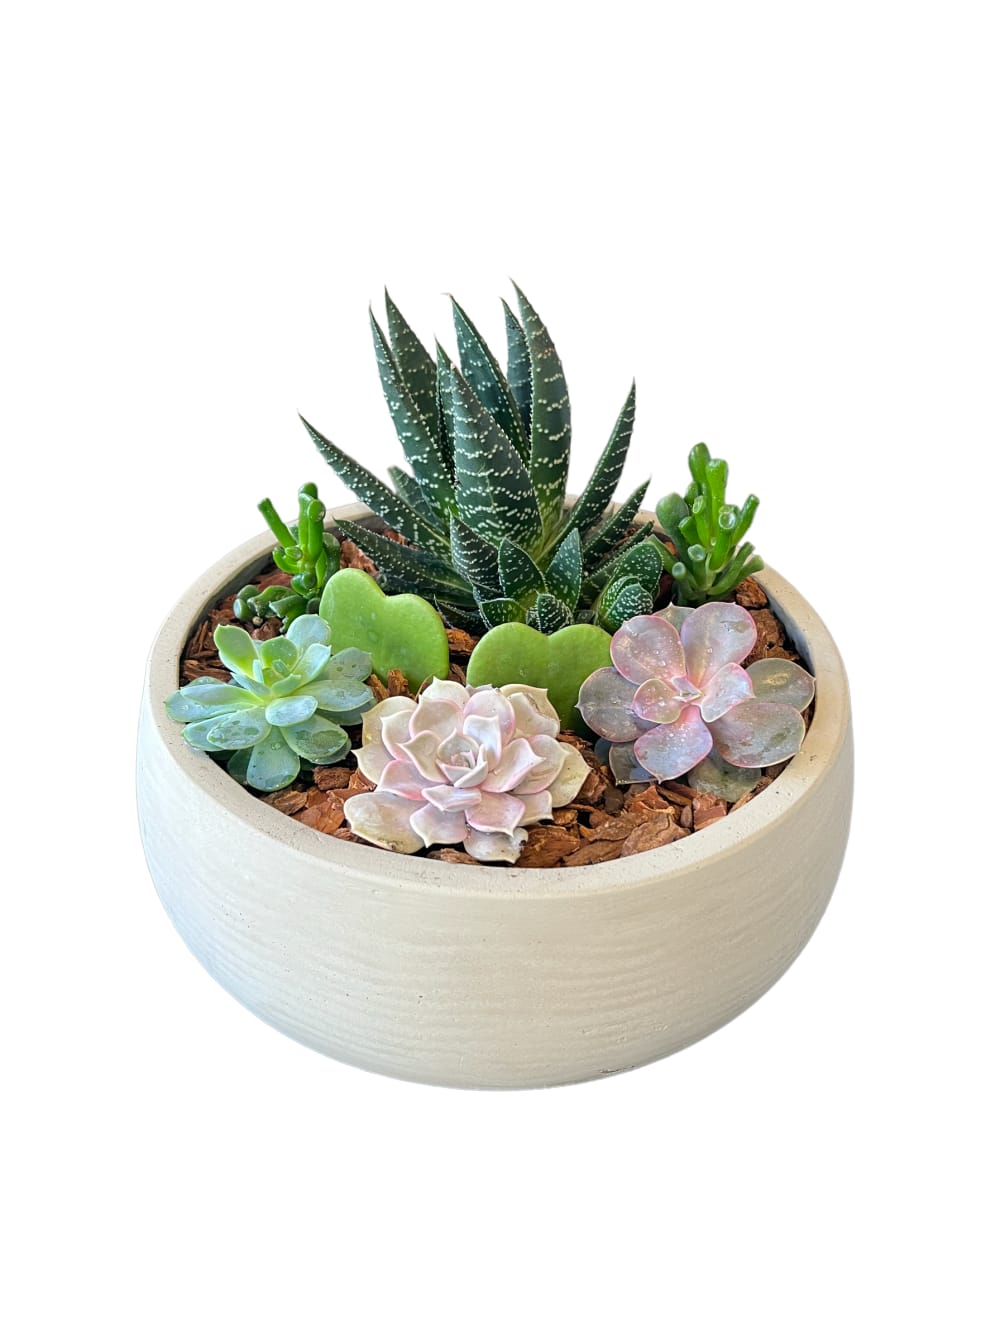 Mixed of succulents designed in a beautiful grey wash ceramic dish as